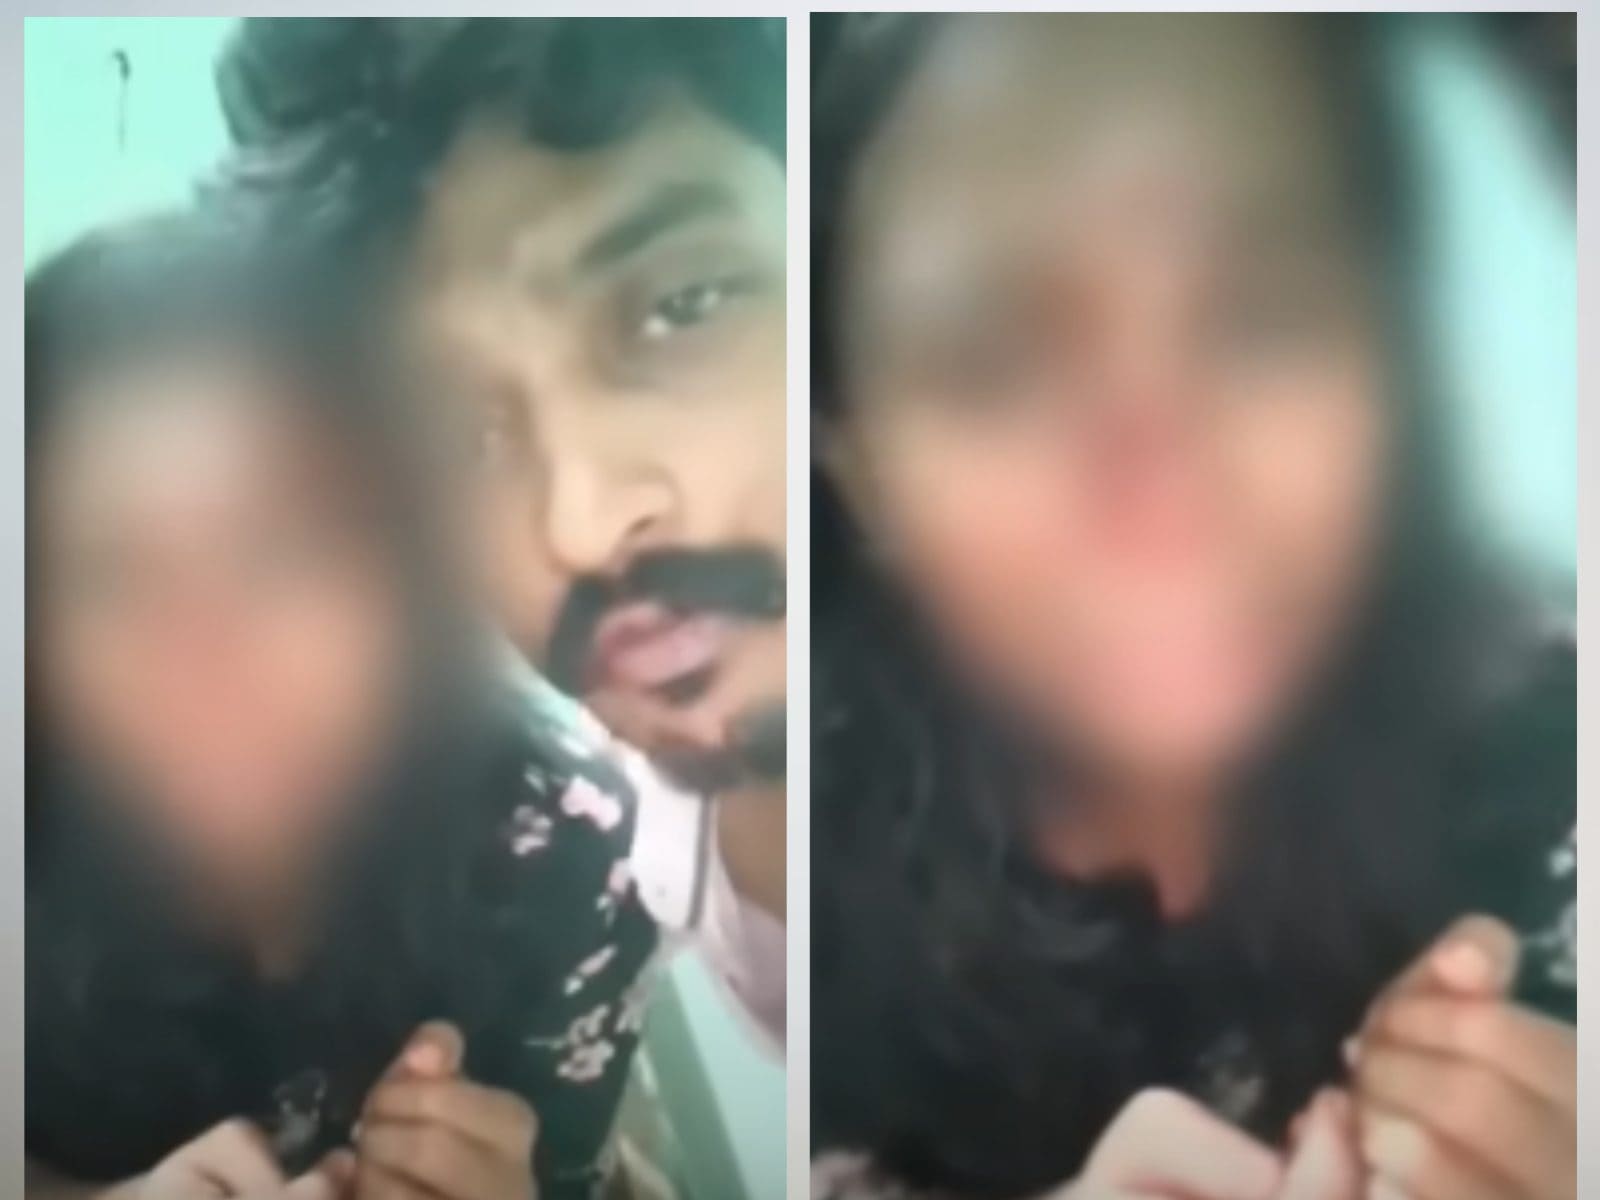 Kerala Man Thrashes Wife, Films Assault, Shares Video With Friends pic